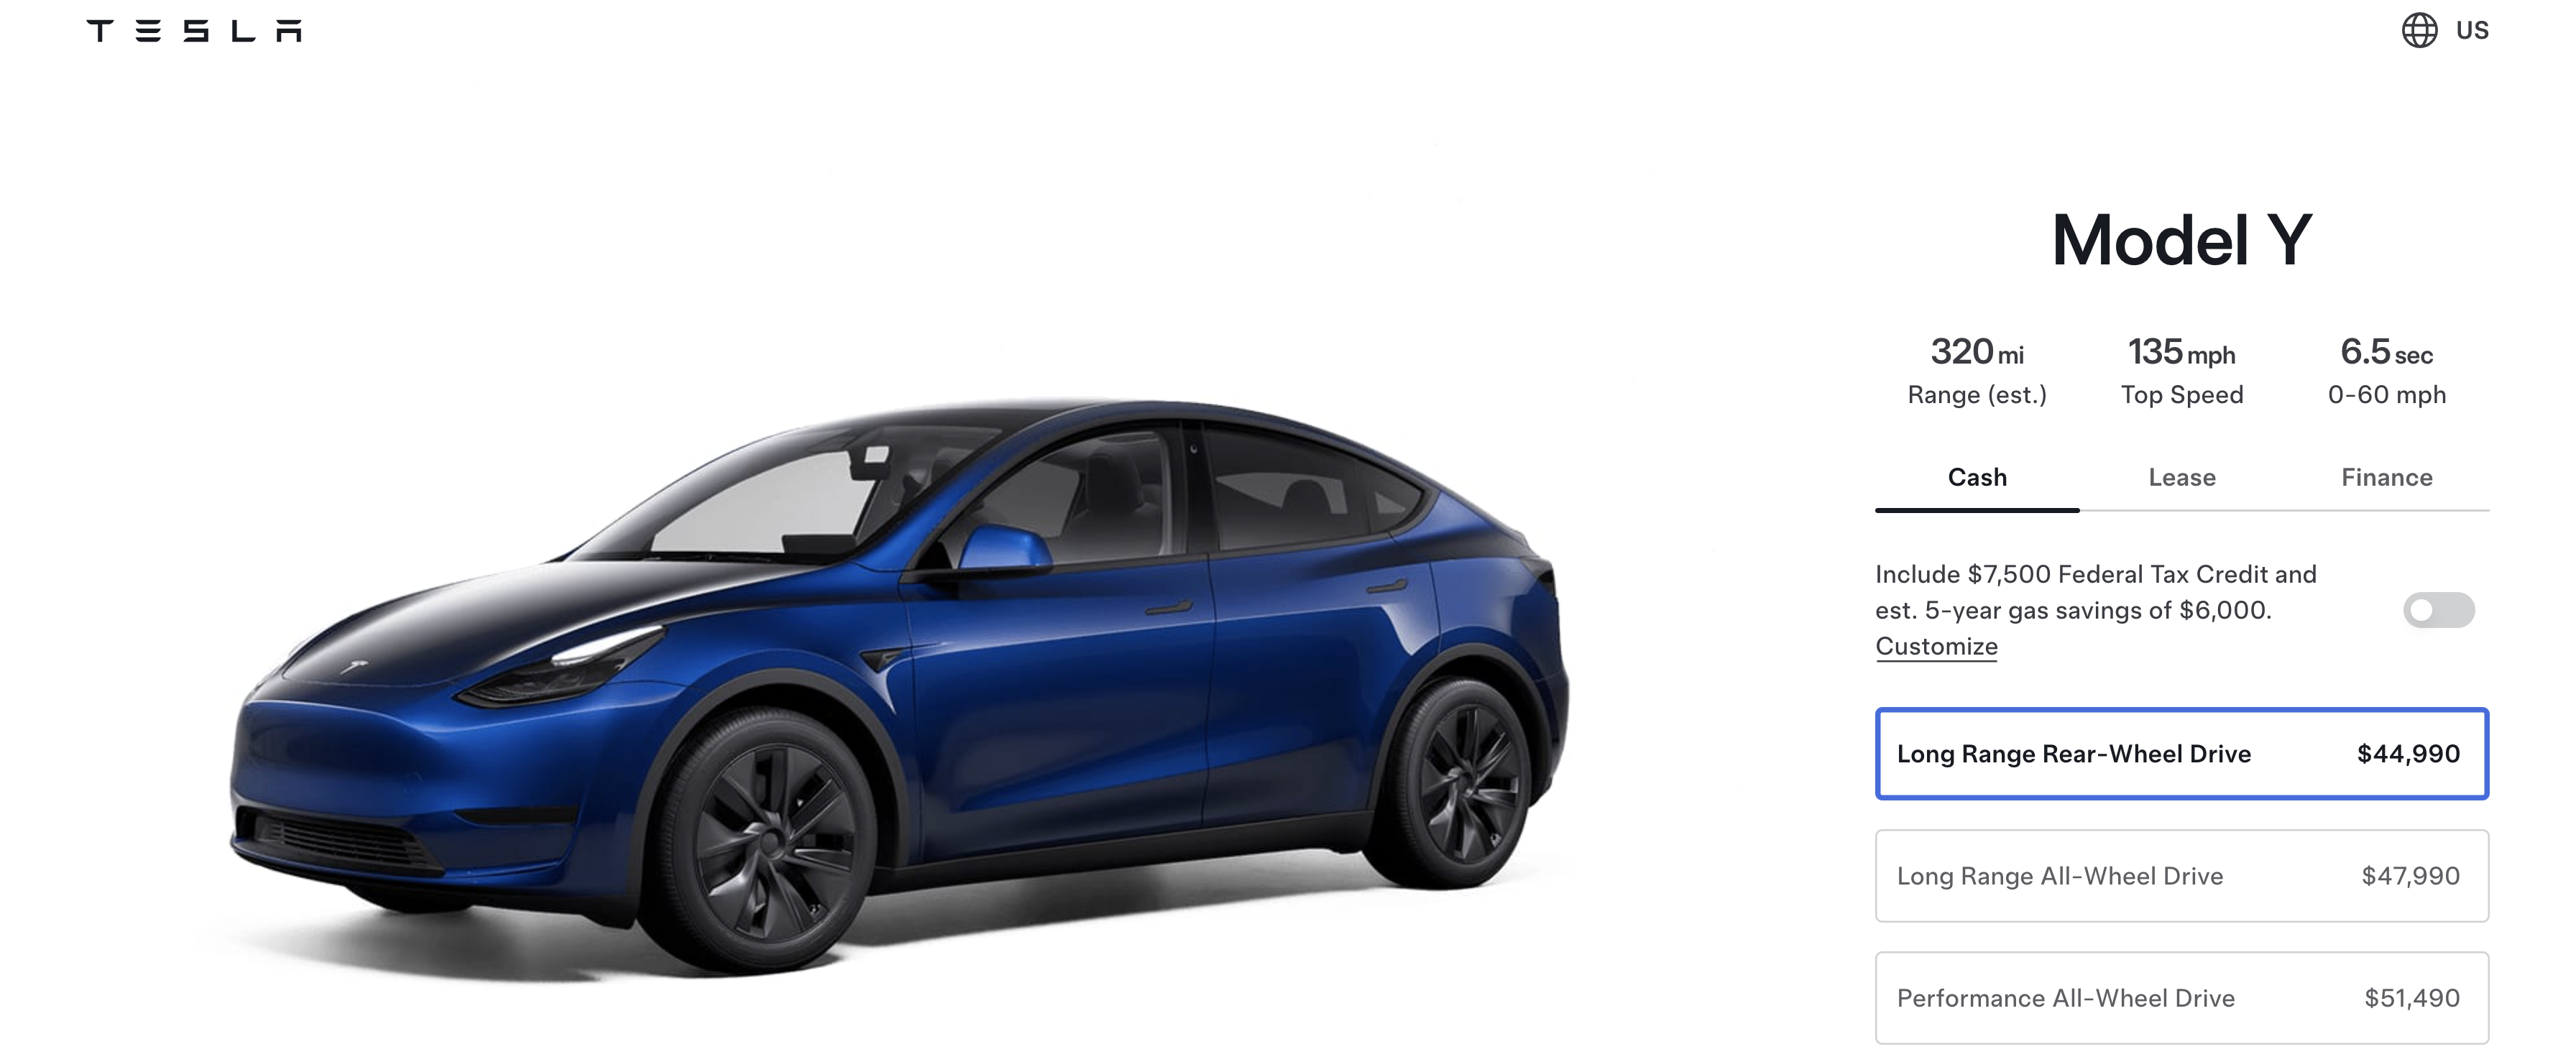 Tesla Model 3 Long Range Now Eligible for Full ,500 Tax Credit — Super Cheap - CleanTechnica